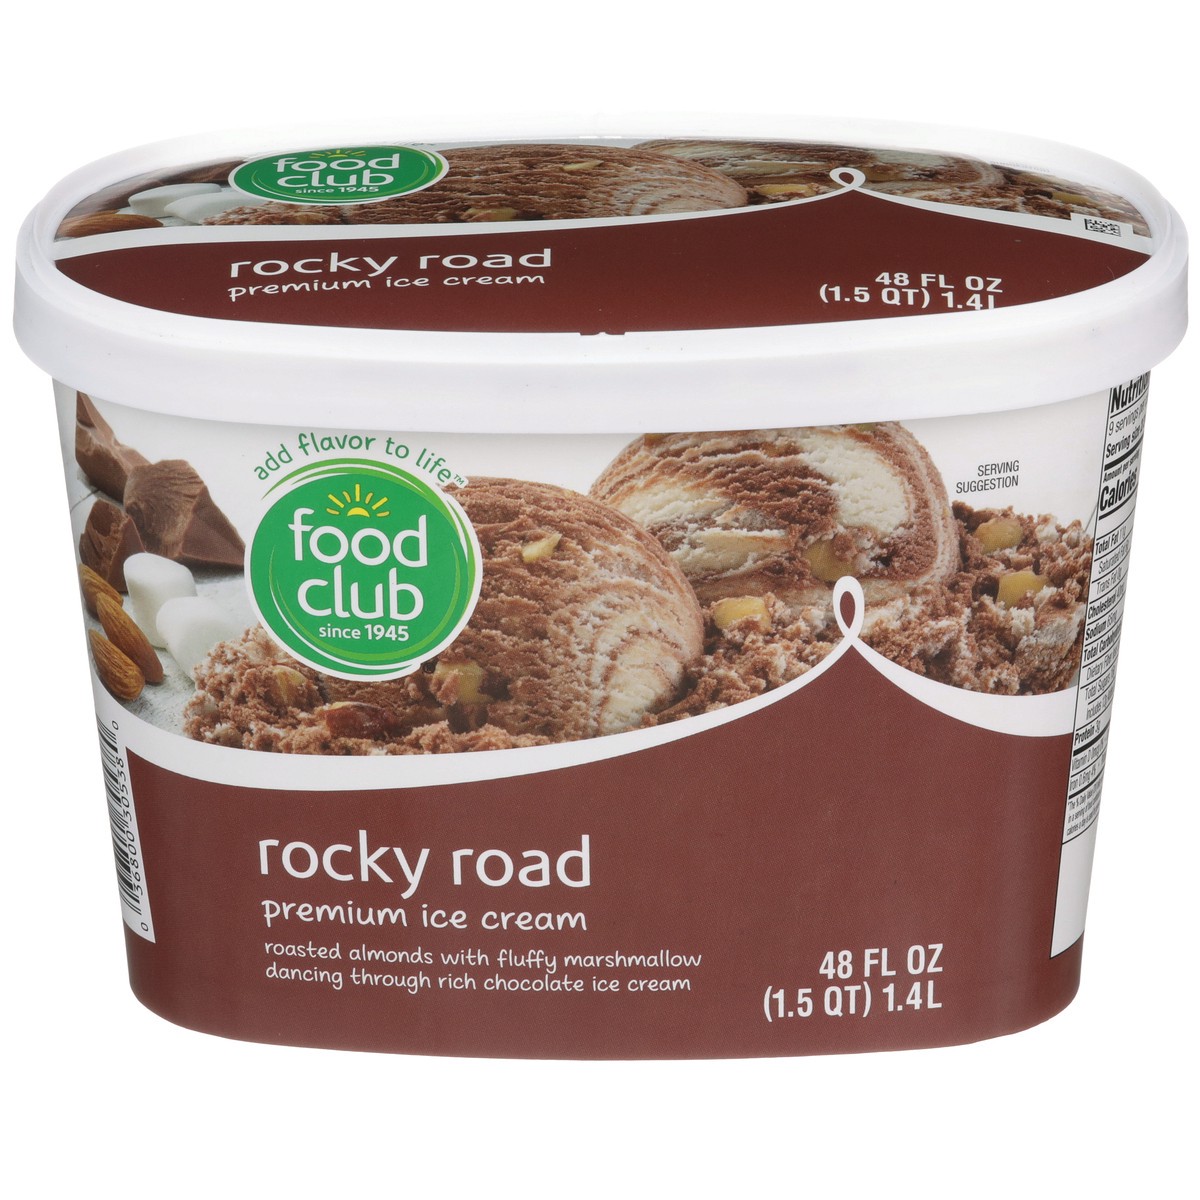 slide 1 of 9, Food Club Rocky Road Roasted Almonds With Fluffy Marshmallow Dancing Through Rich Chocolate Premium Ice Cream, 1.5 qt